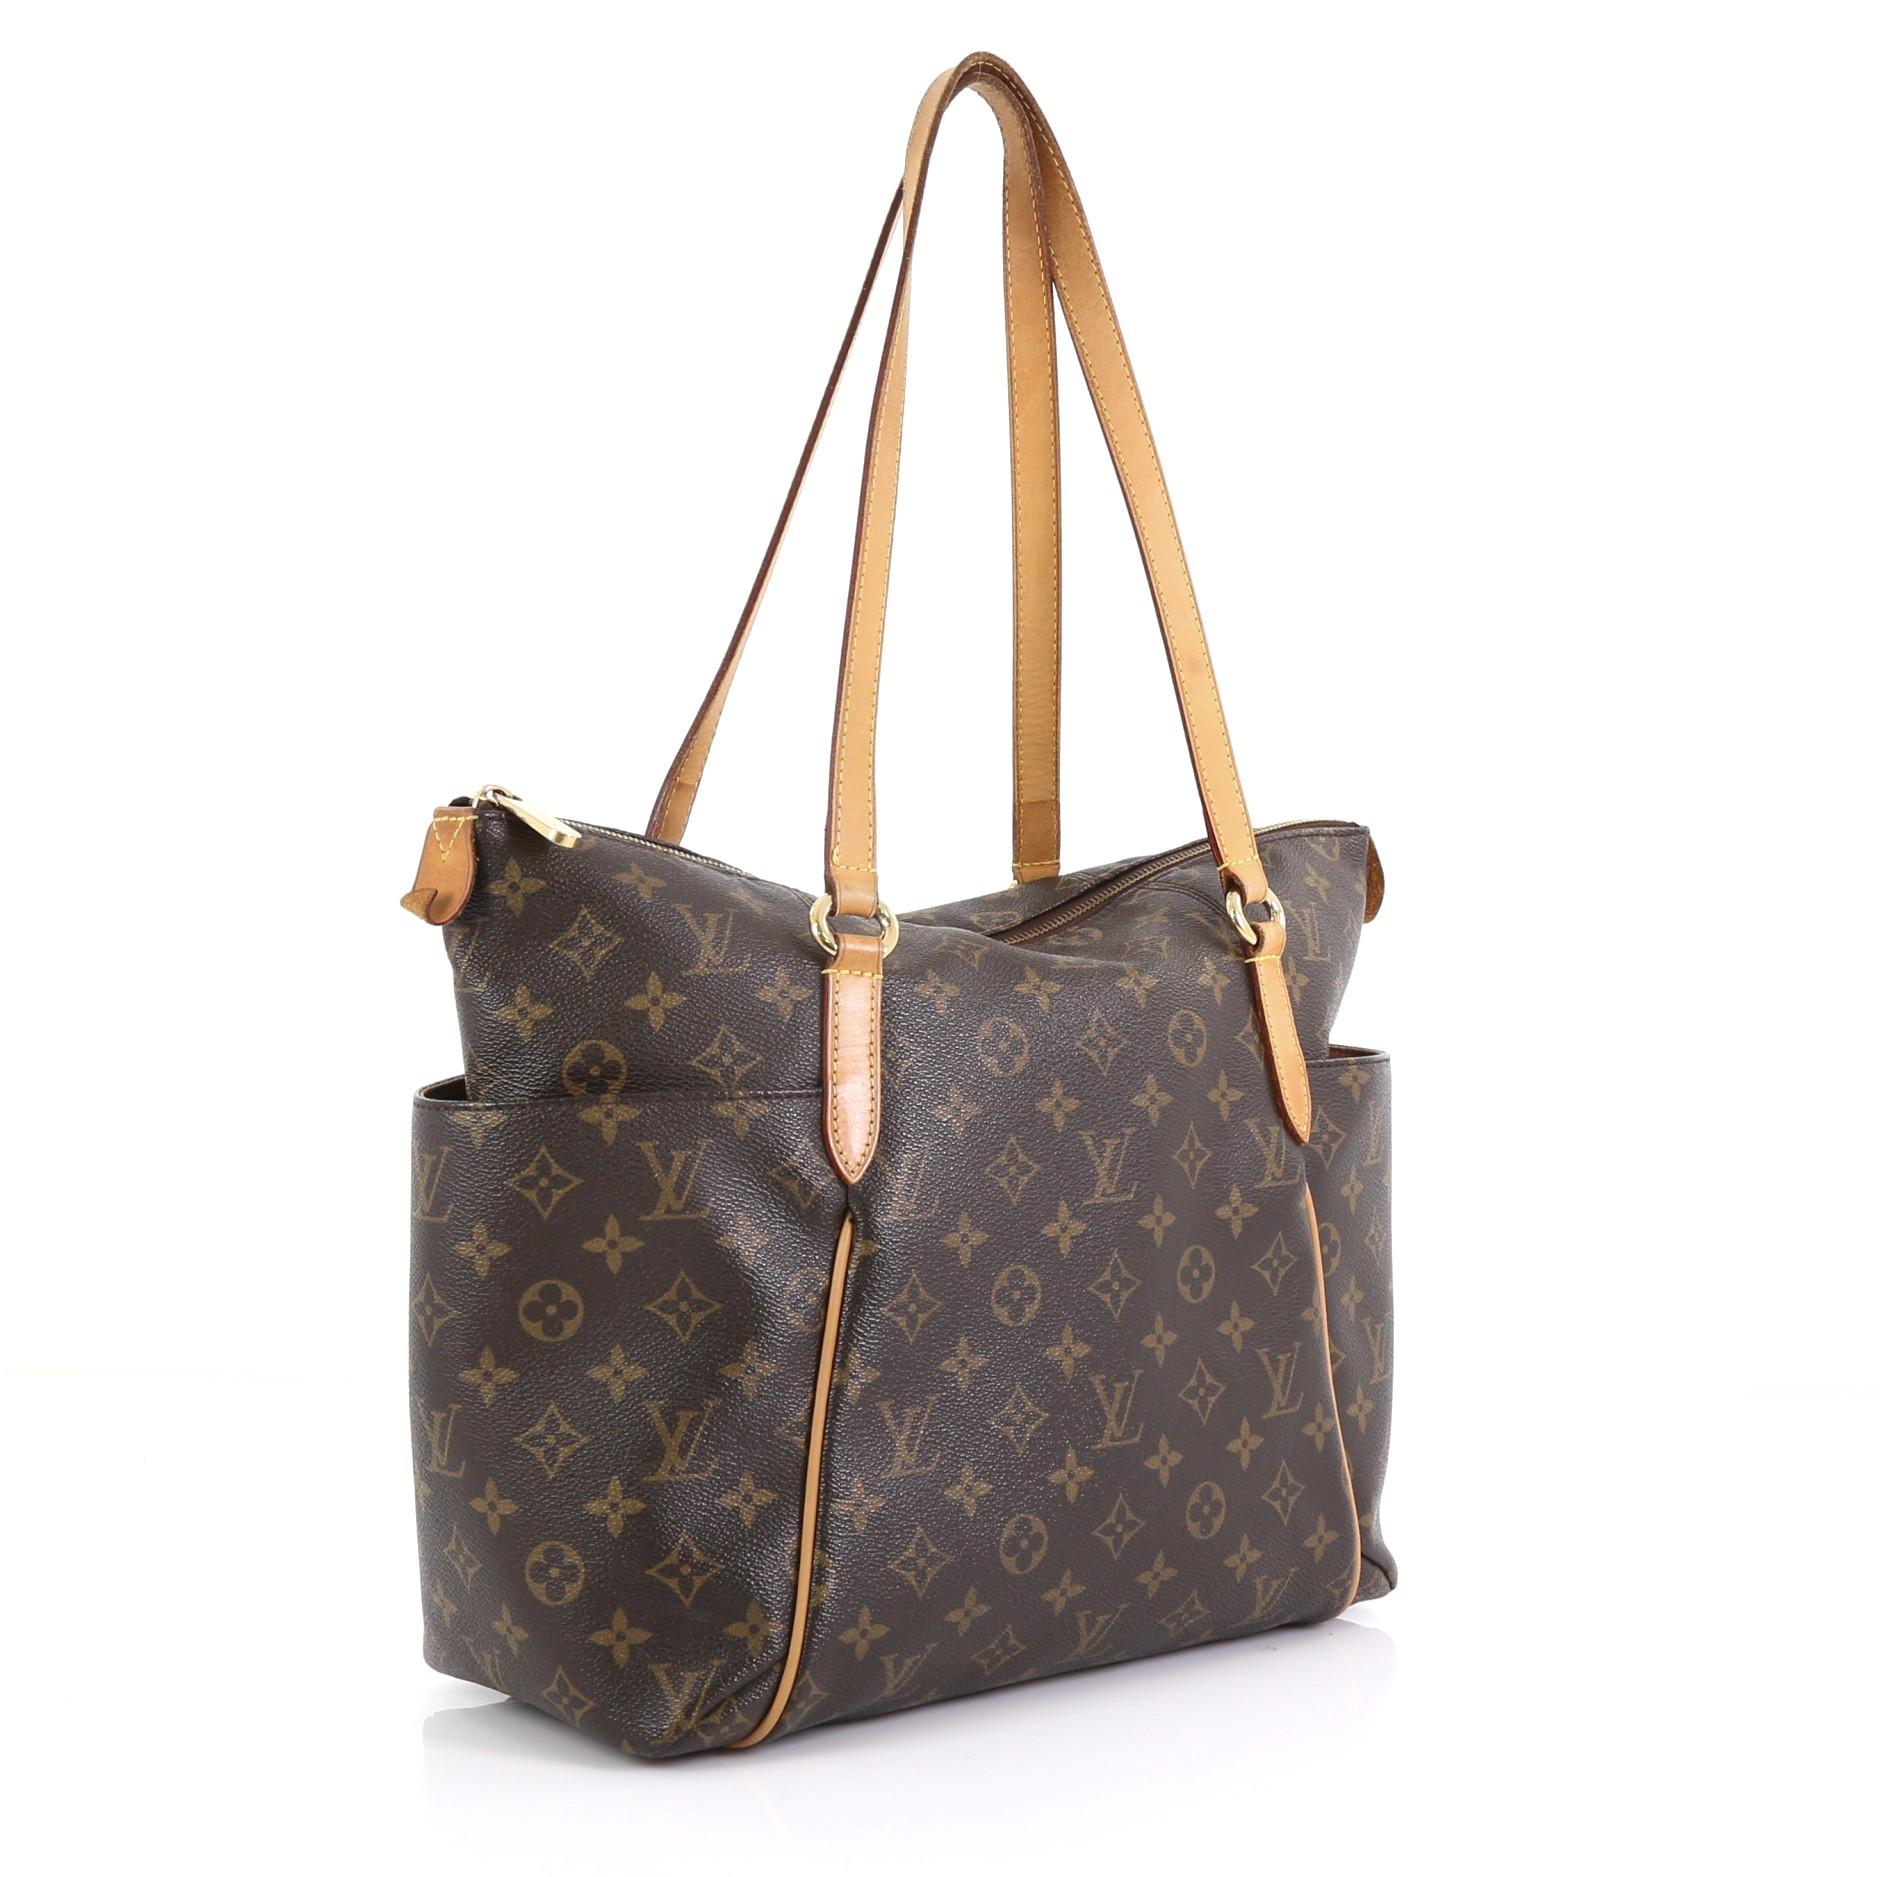 This Louis Vuitton Totally Handbag Monogram Canvas MM, crafted from brown monogram coated canvas, features tall cowhide leather handles and trim, two exterior lateral pockets, and gold-tone hardware. Its zip closure opens to a brown fabric interior